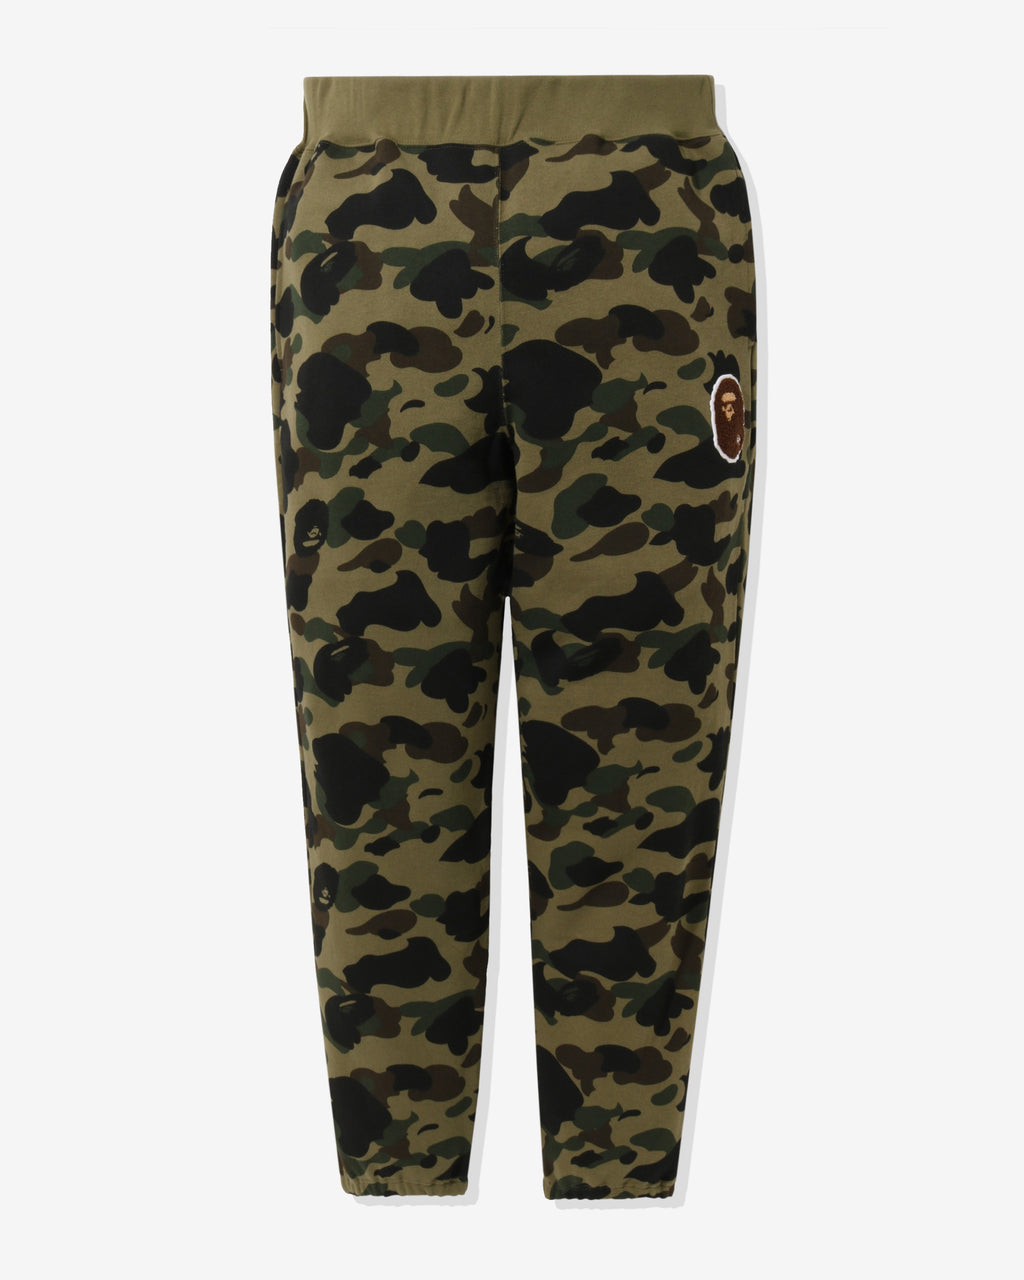 Bape – Tagged bottoms – Undefeated